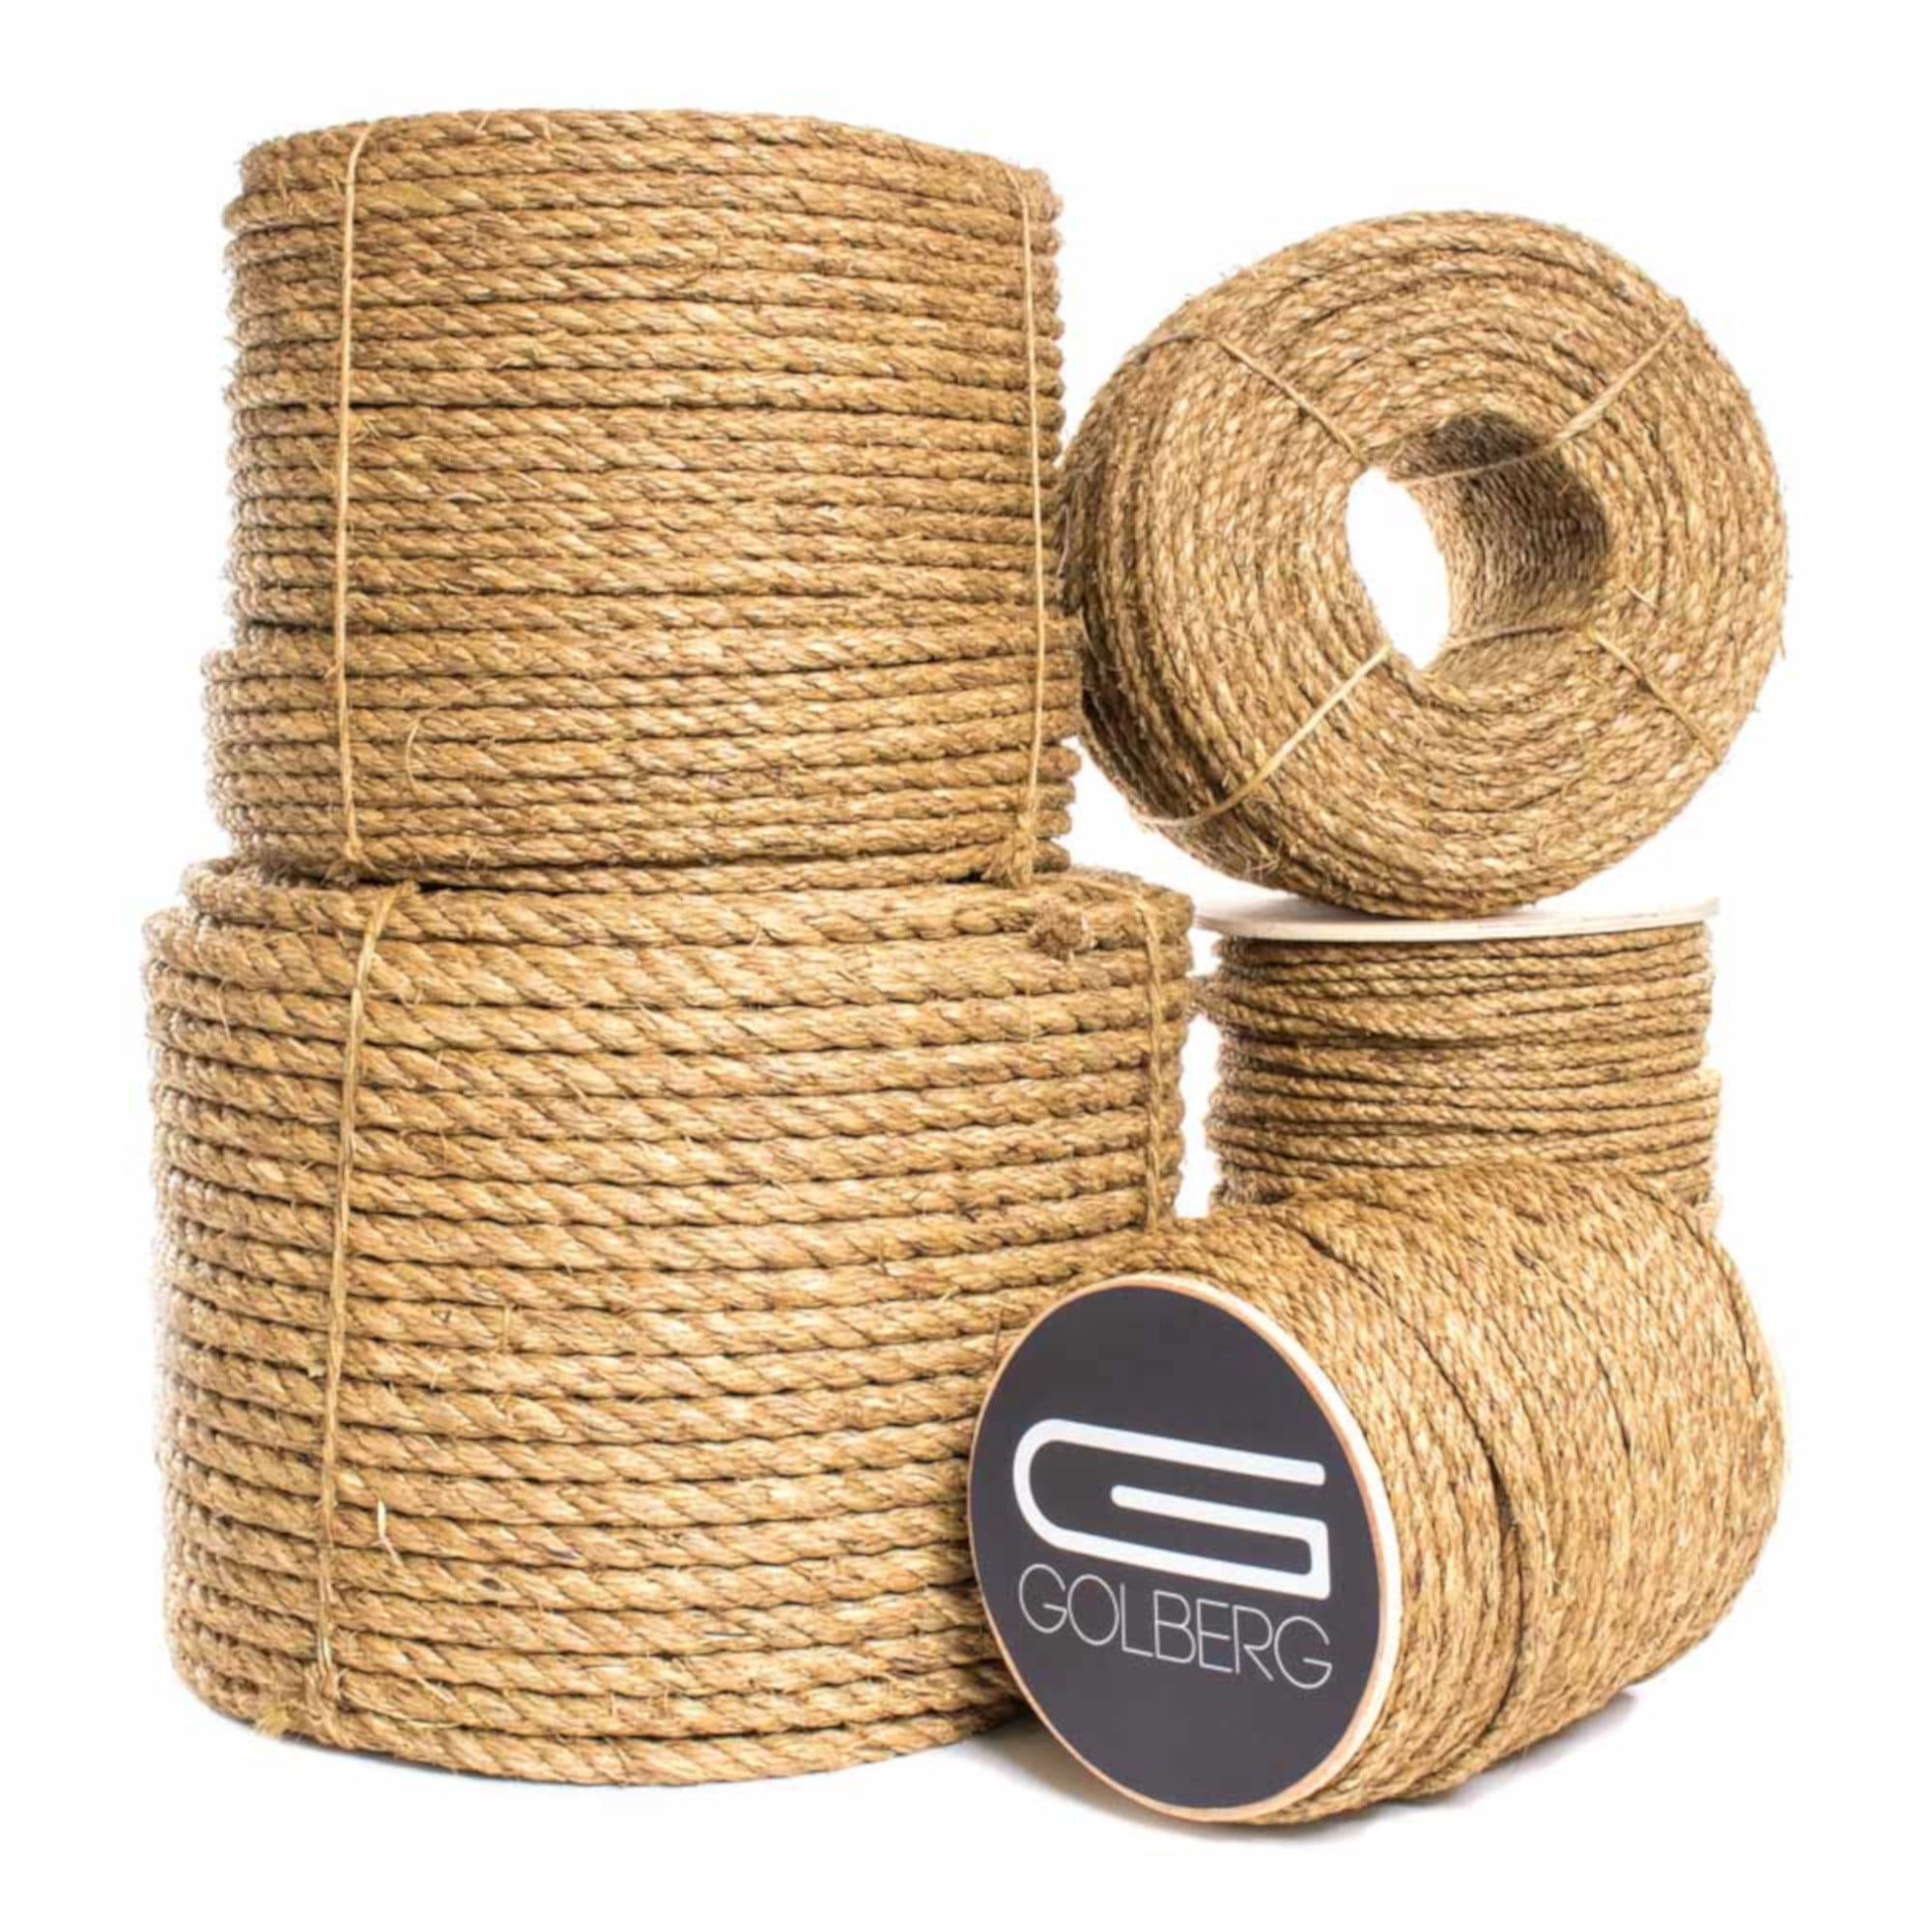 Ropes for Indoor and Outdoor Use Size 1/4-3 inch SGT KNOTS Manila Rope Tan Rope/Brown Rope Length 10-1200 ft 1/4 inch x 400 feet Twisted Manila 3 Strand Natural Fiber Cord 